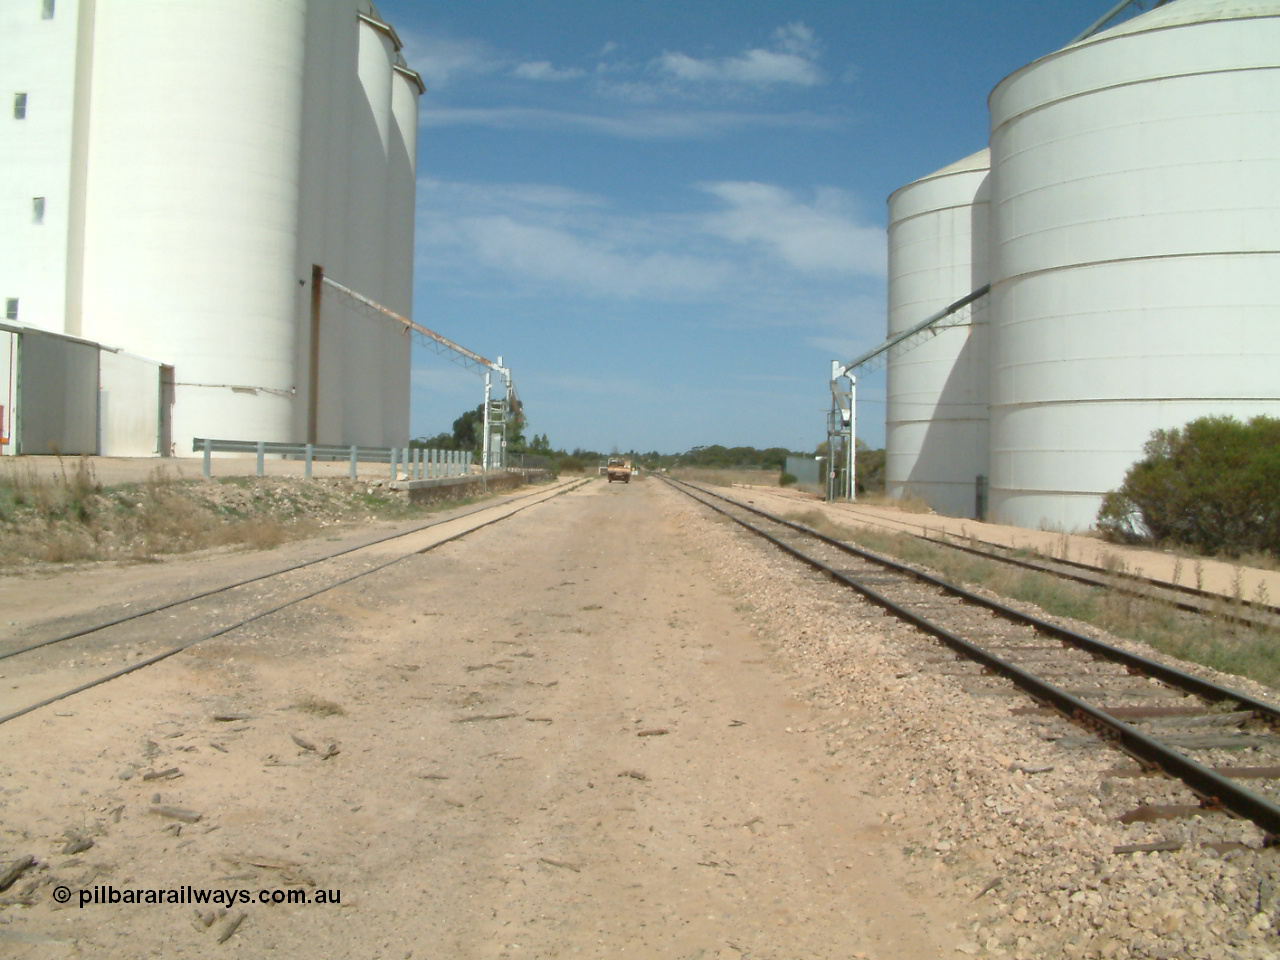 030405 140326
Kyancutta, yard view looking south with both silo complexes and their respective sidings either side of the mainline, looking south, 5th April 2003.
